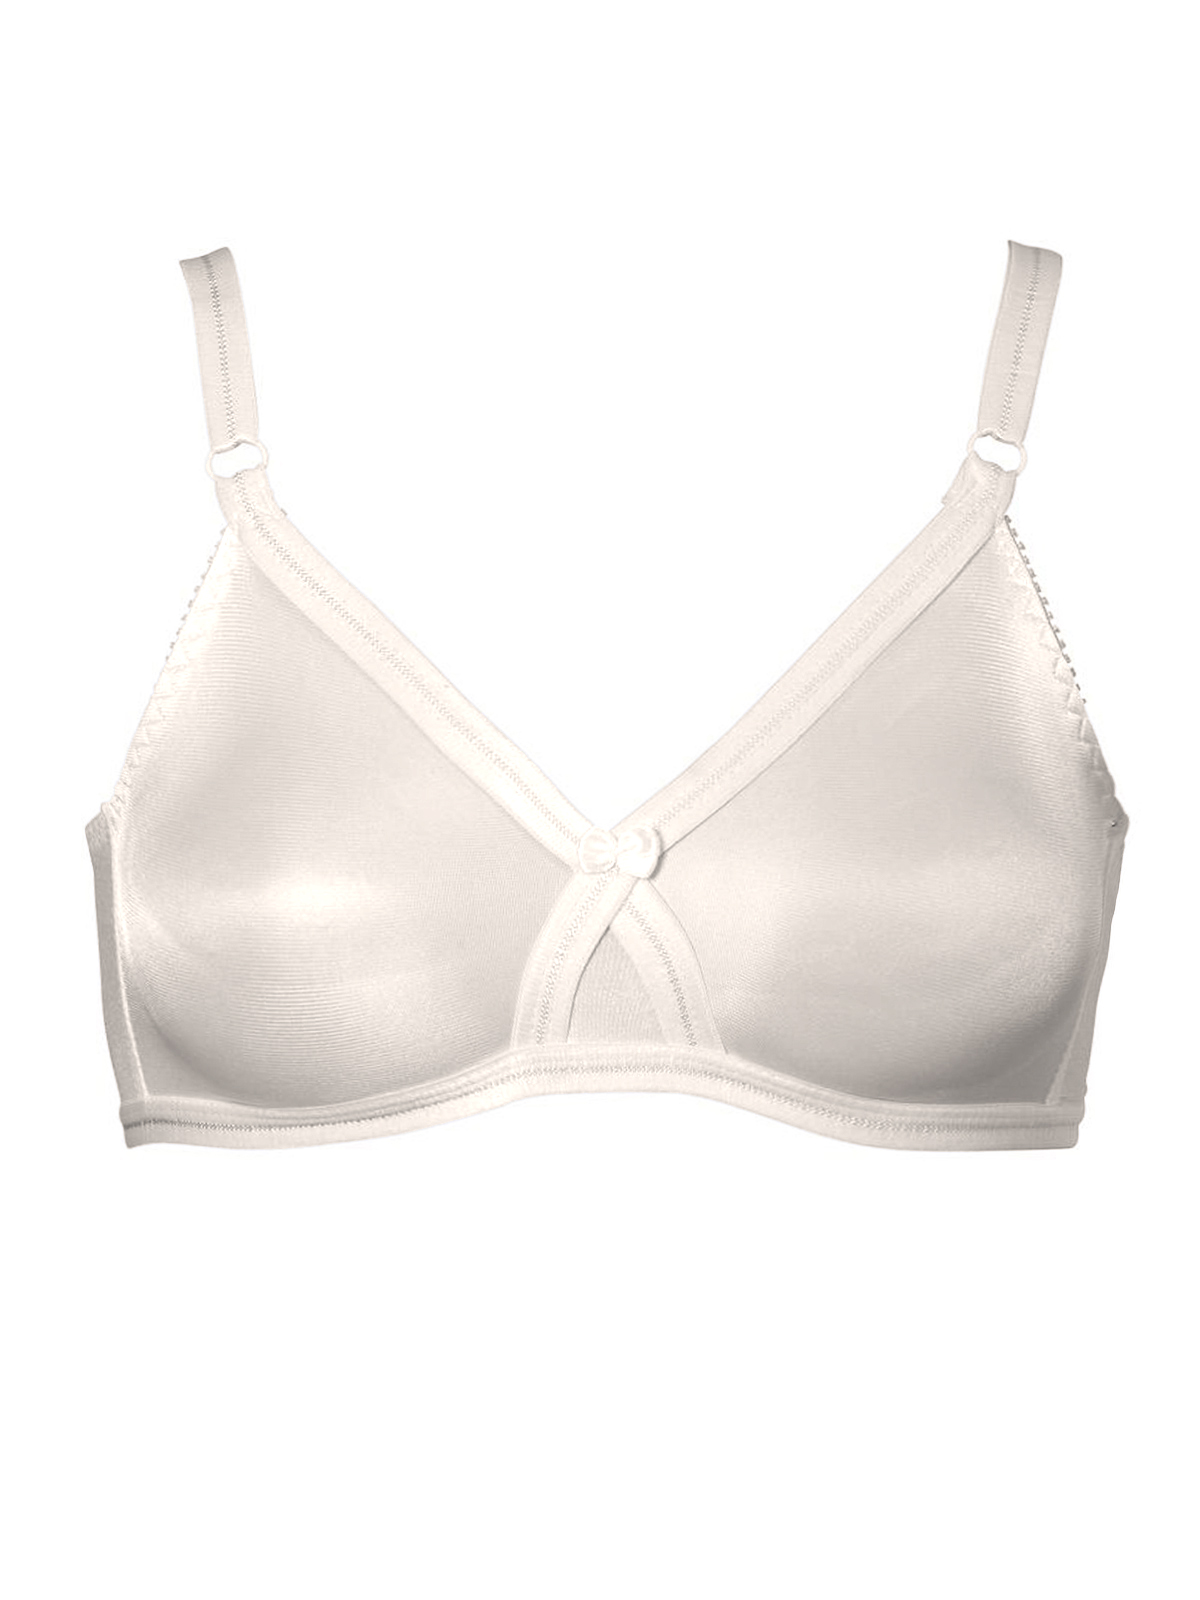 Trofe - - Trofé CHAMPAGNE Crossover Non-Wired Full Cup Bra - Size 34 to 42  (B-C-D)